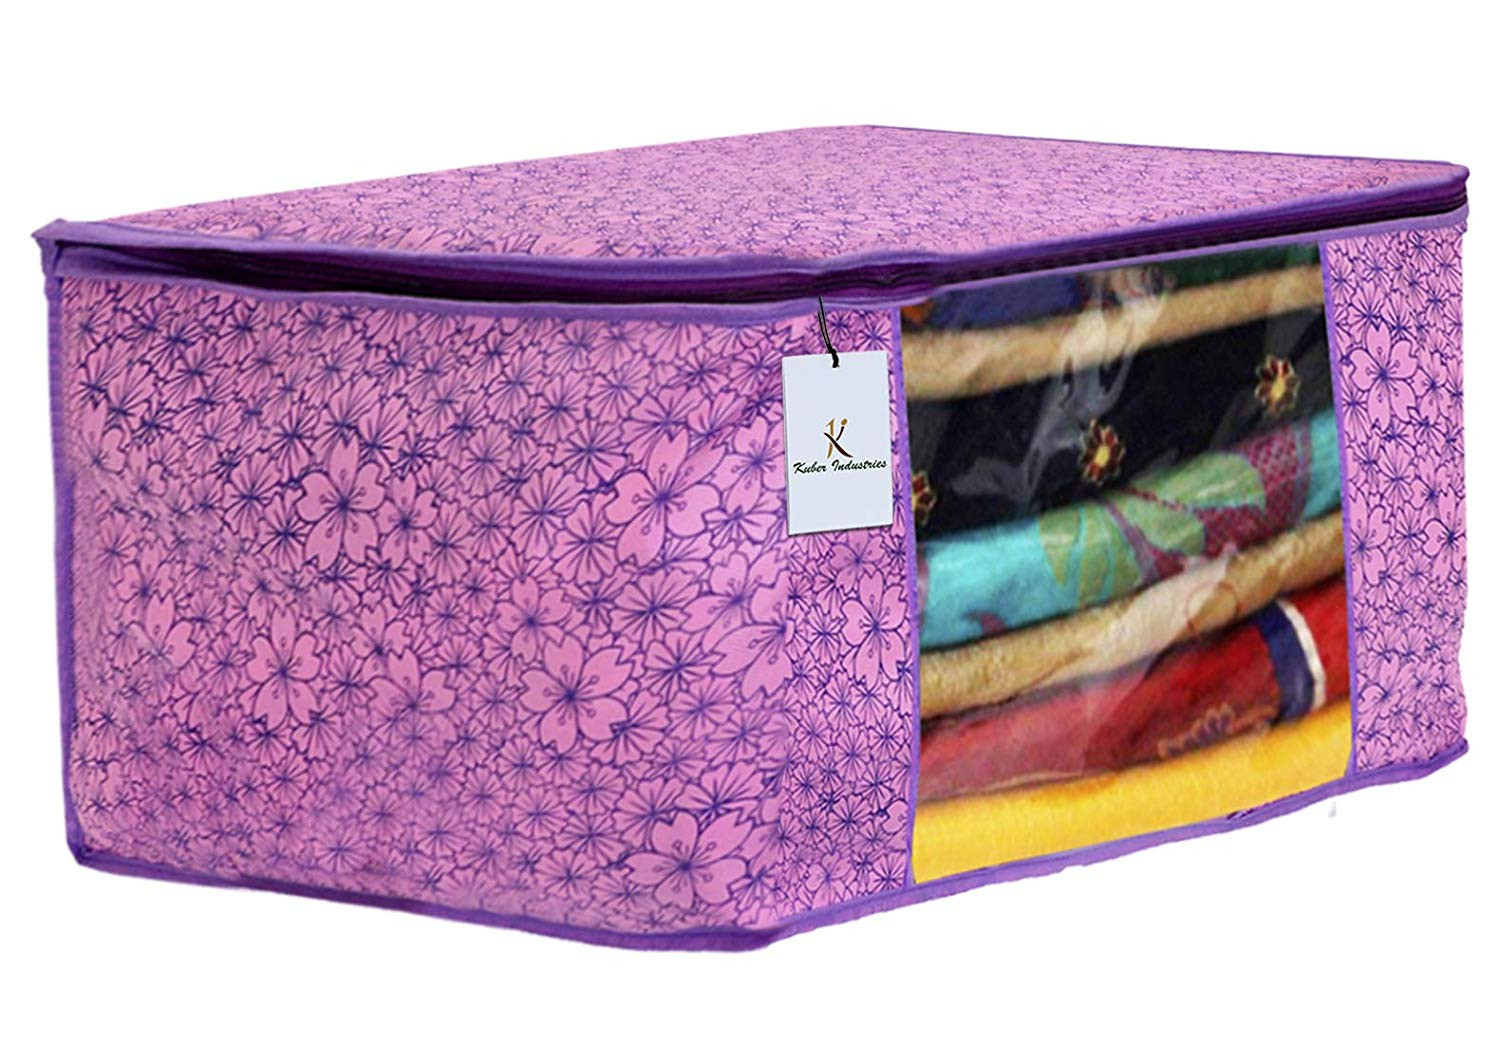 Kuber Industries Metalic Printed Non Woven Fabric Saree Cover Set with Transparent Window, Extra Large, Red & Beige & Brown & Pink Purple & Gold -CTKTC40847